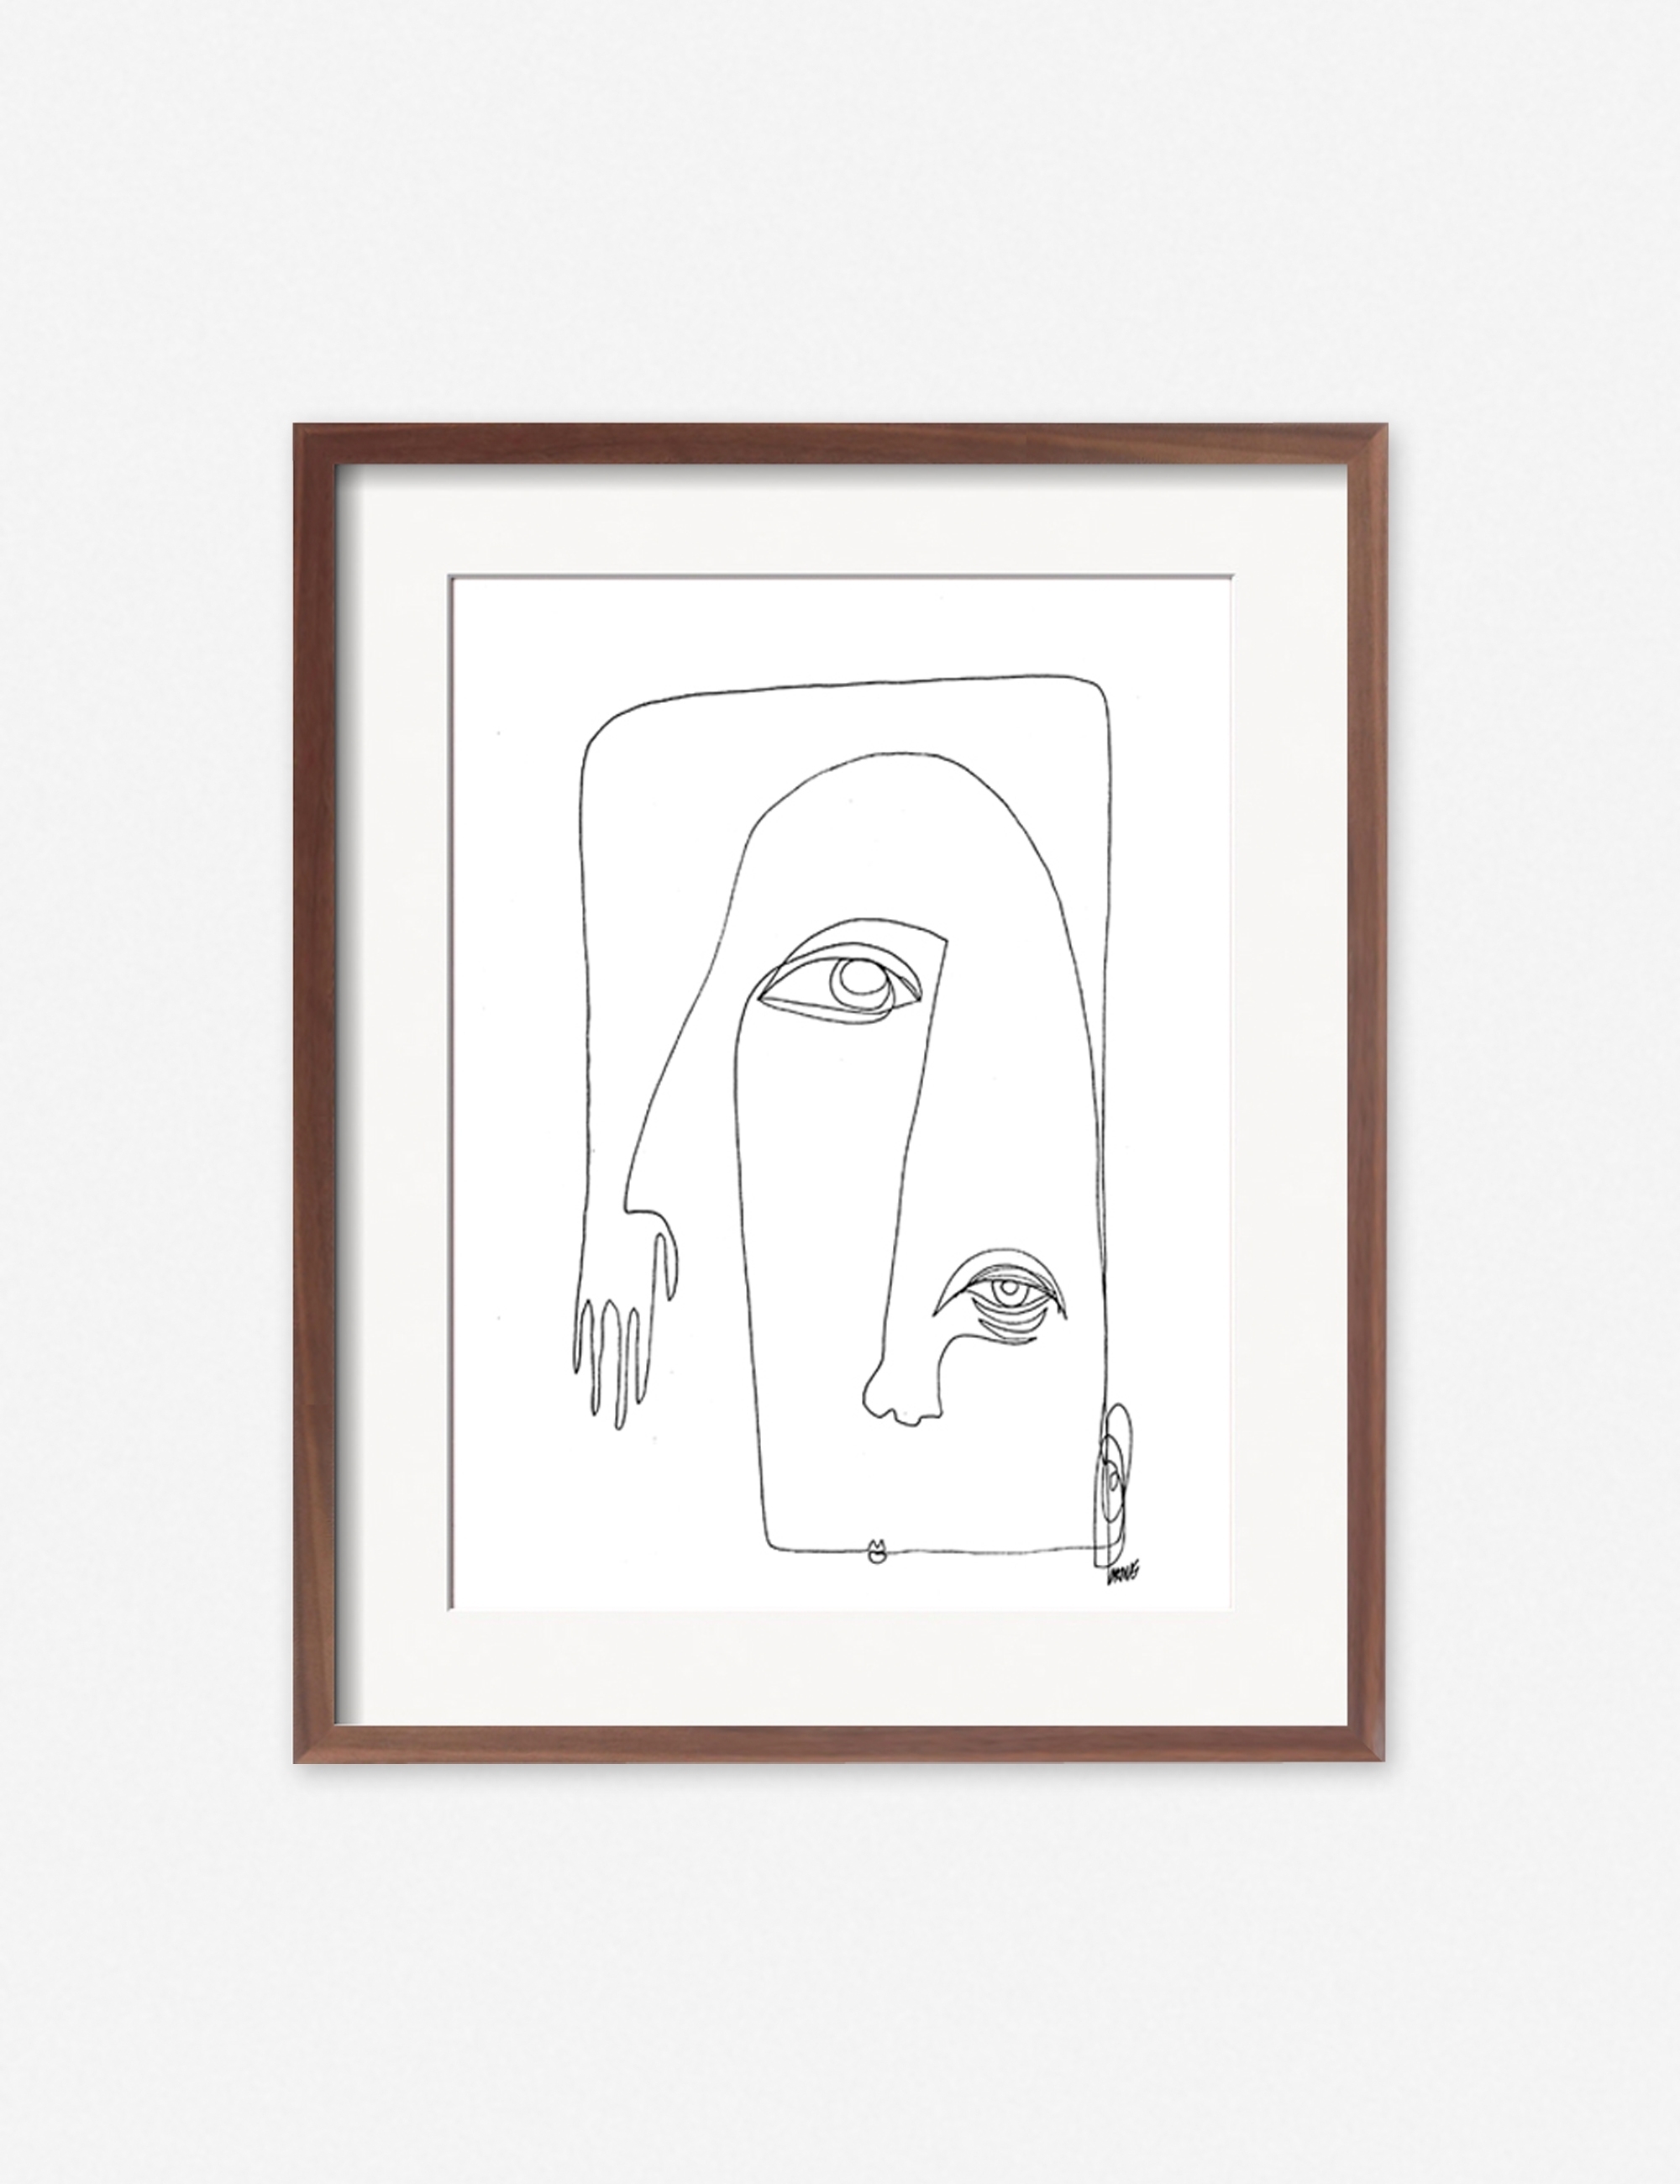 Picasso Print by Damienne Merlina - Image 6